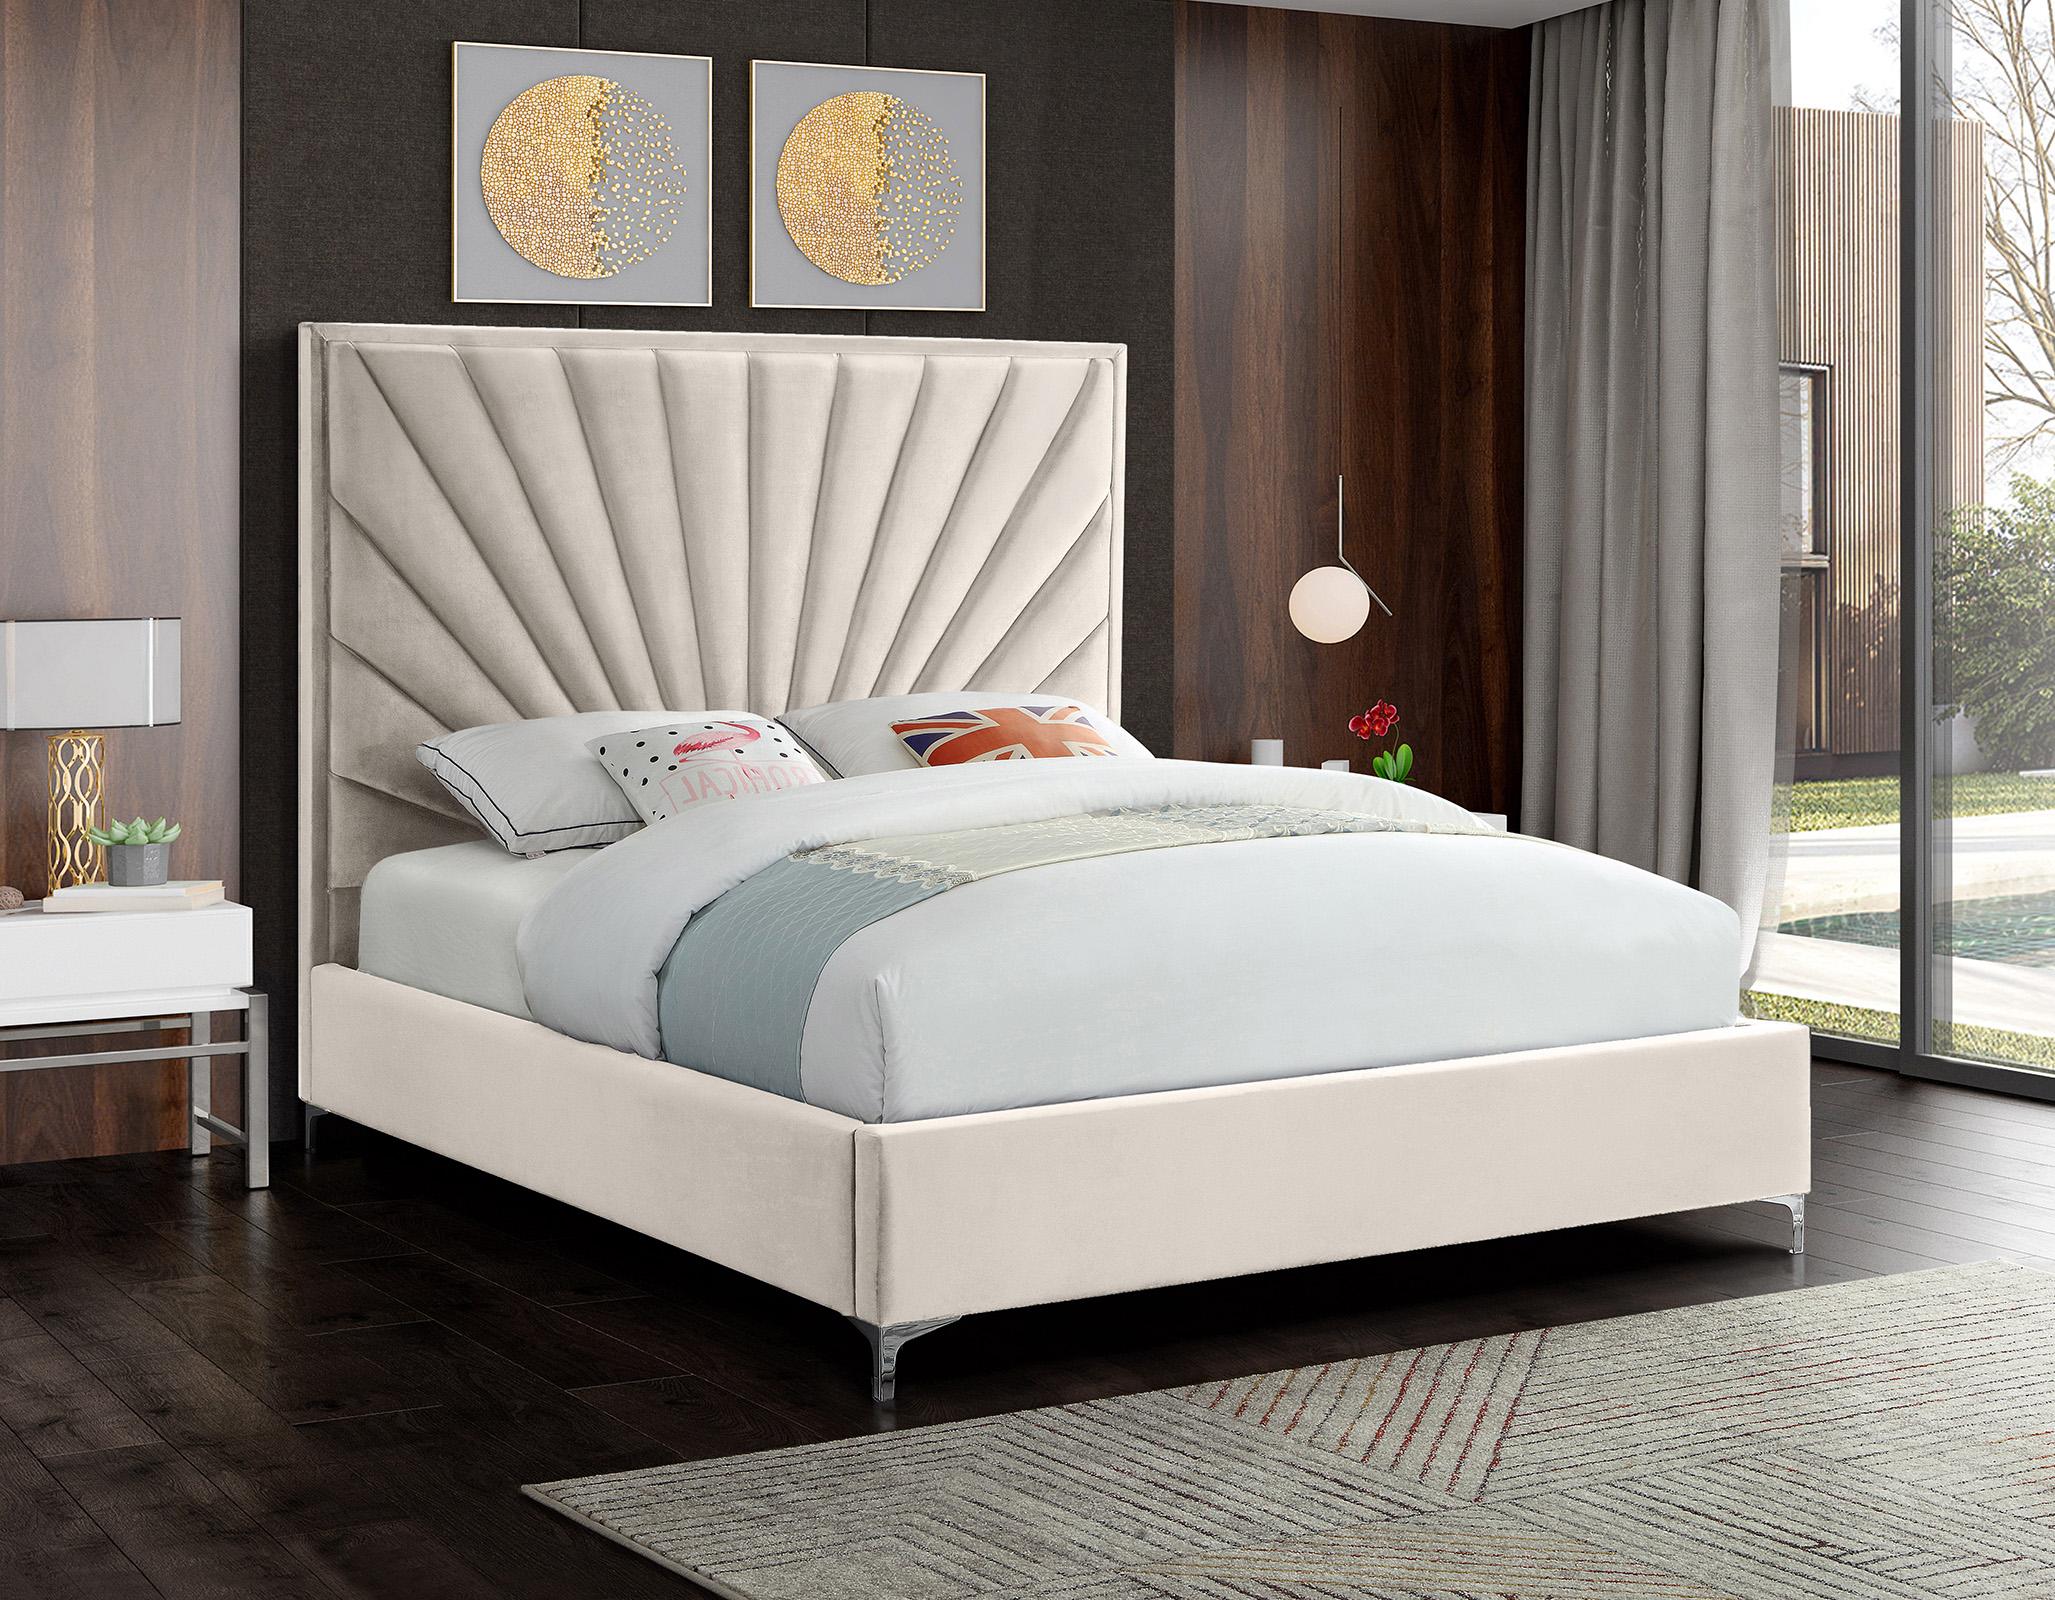 

    
Luxurious Cream Velvet Tufted King Bed ECLIPSE Meridian Contemporary Modern
